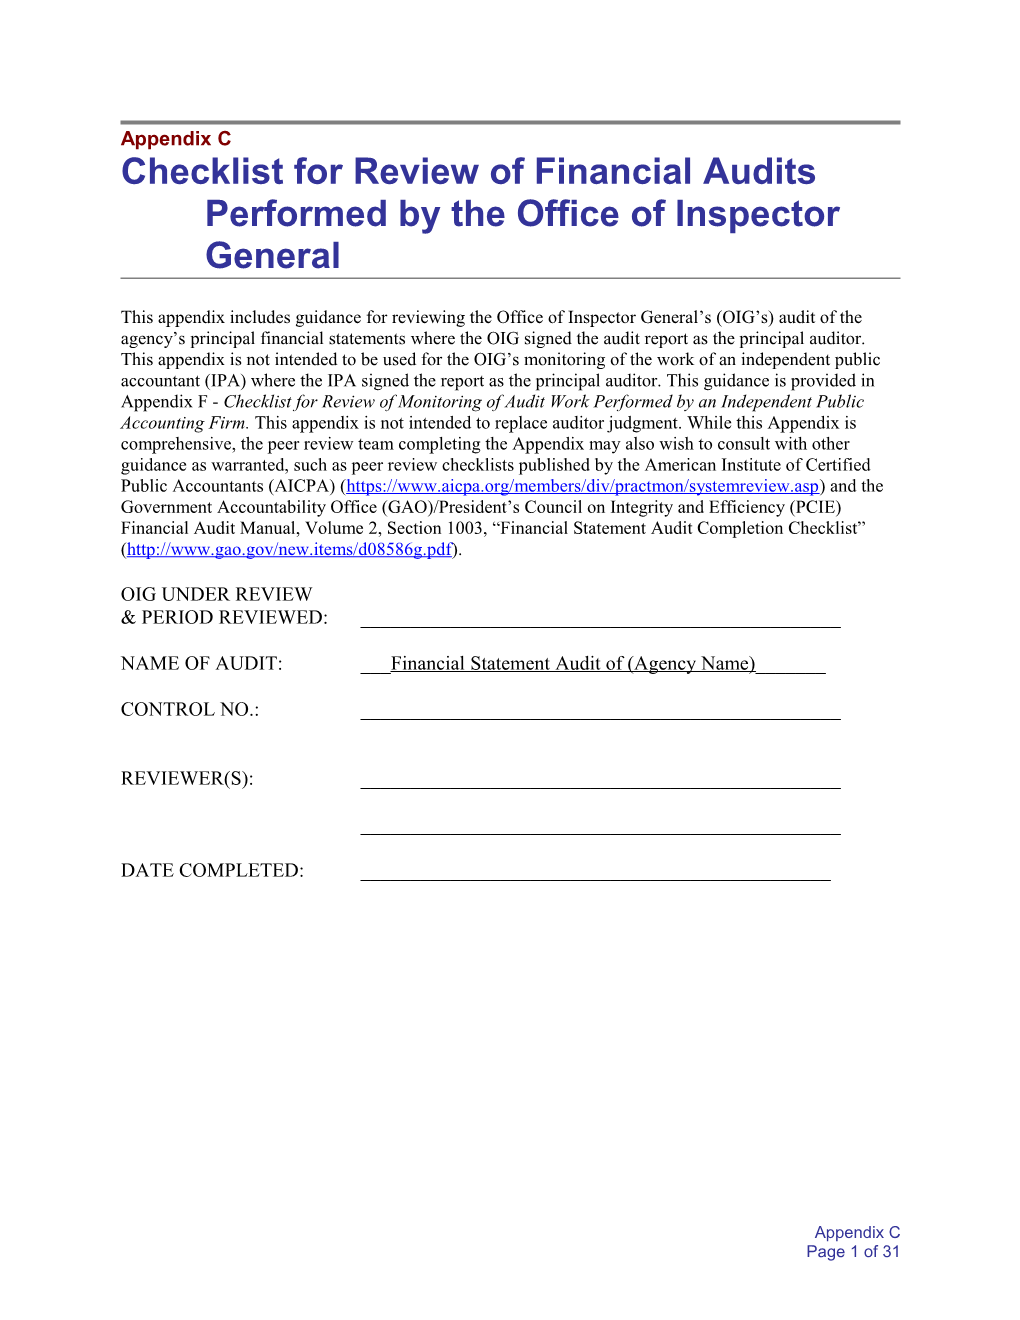 Checklist for Review of Financial Audits Performed by the Office of Inspector General